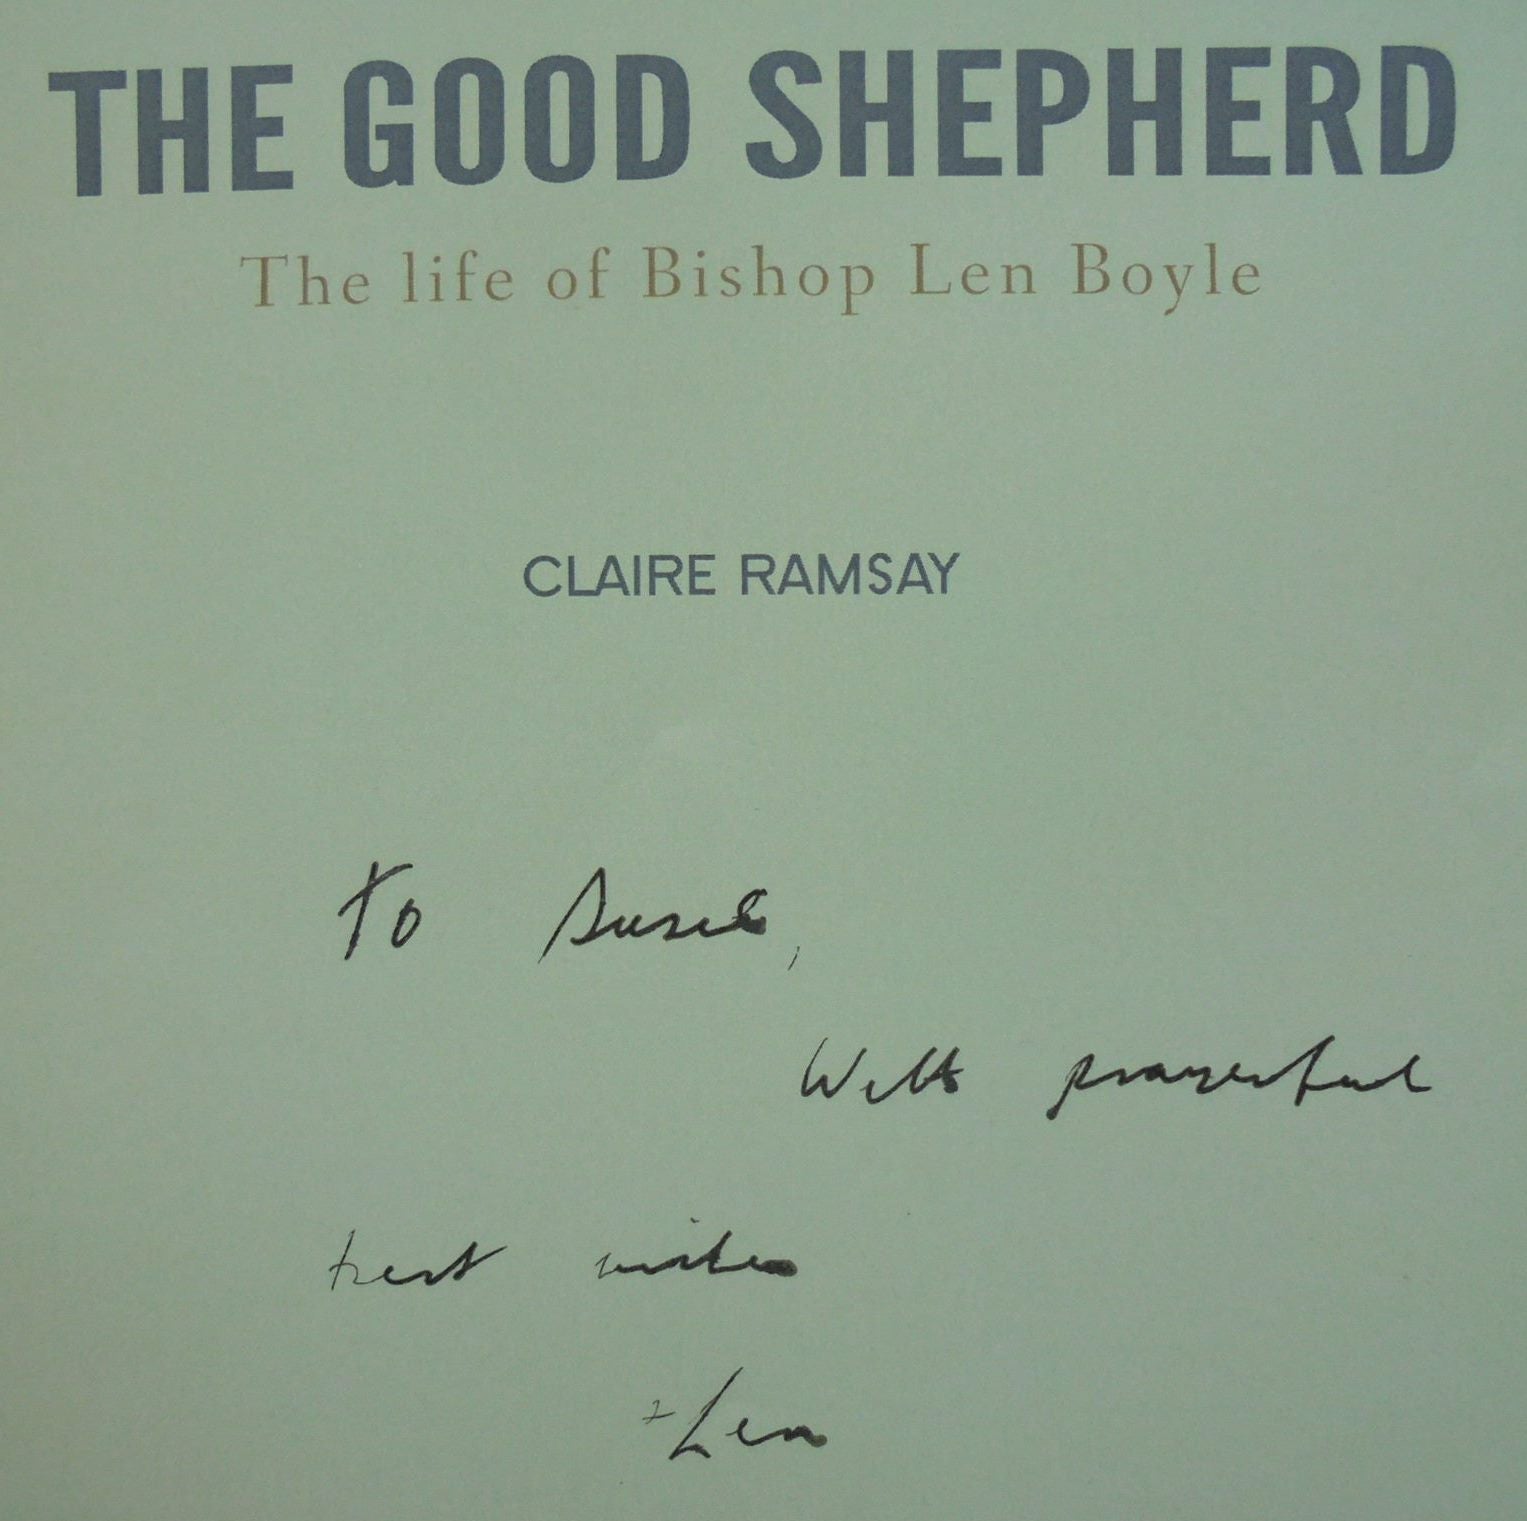 The Good Shepherd: The Life of Bishop Len Boyle. By Claire Ramsay. SIGNED BY LEN BOYLE.